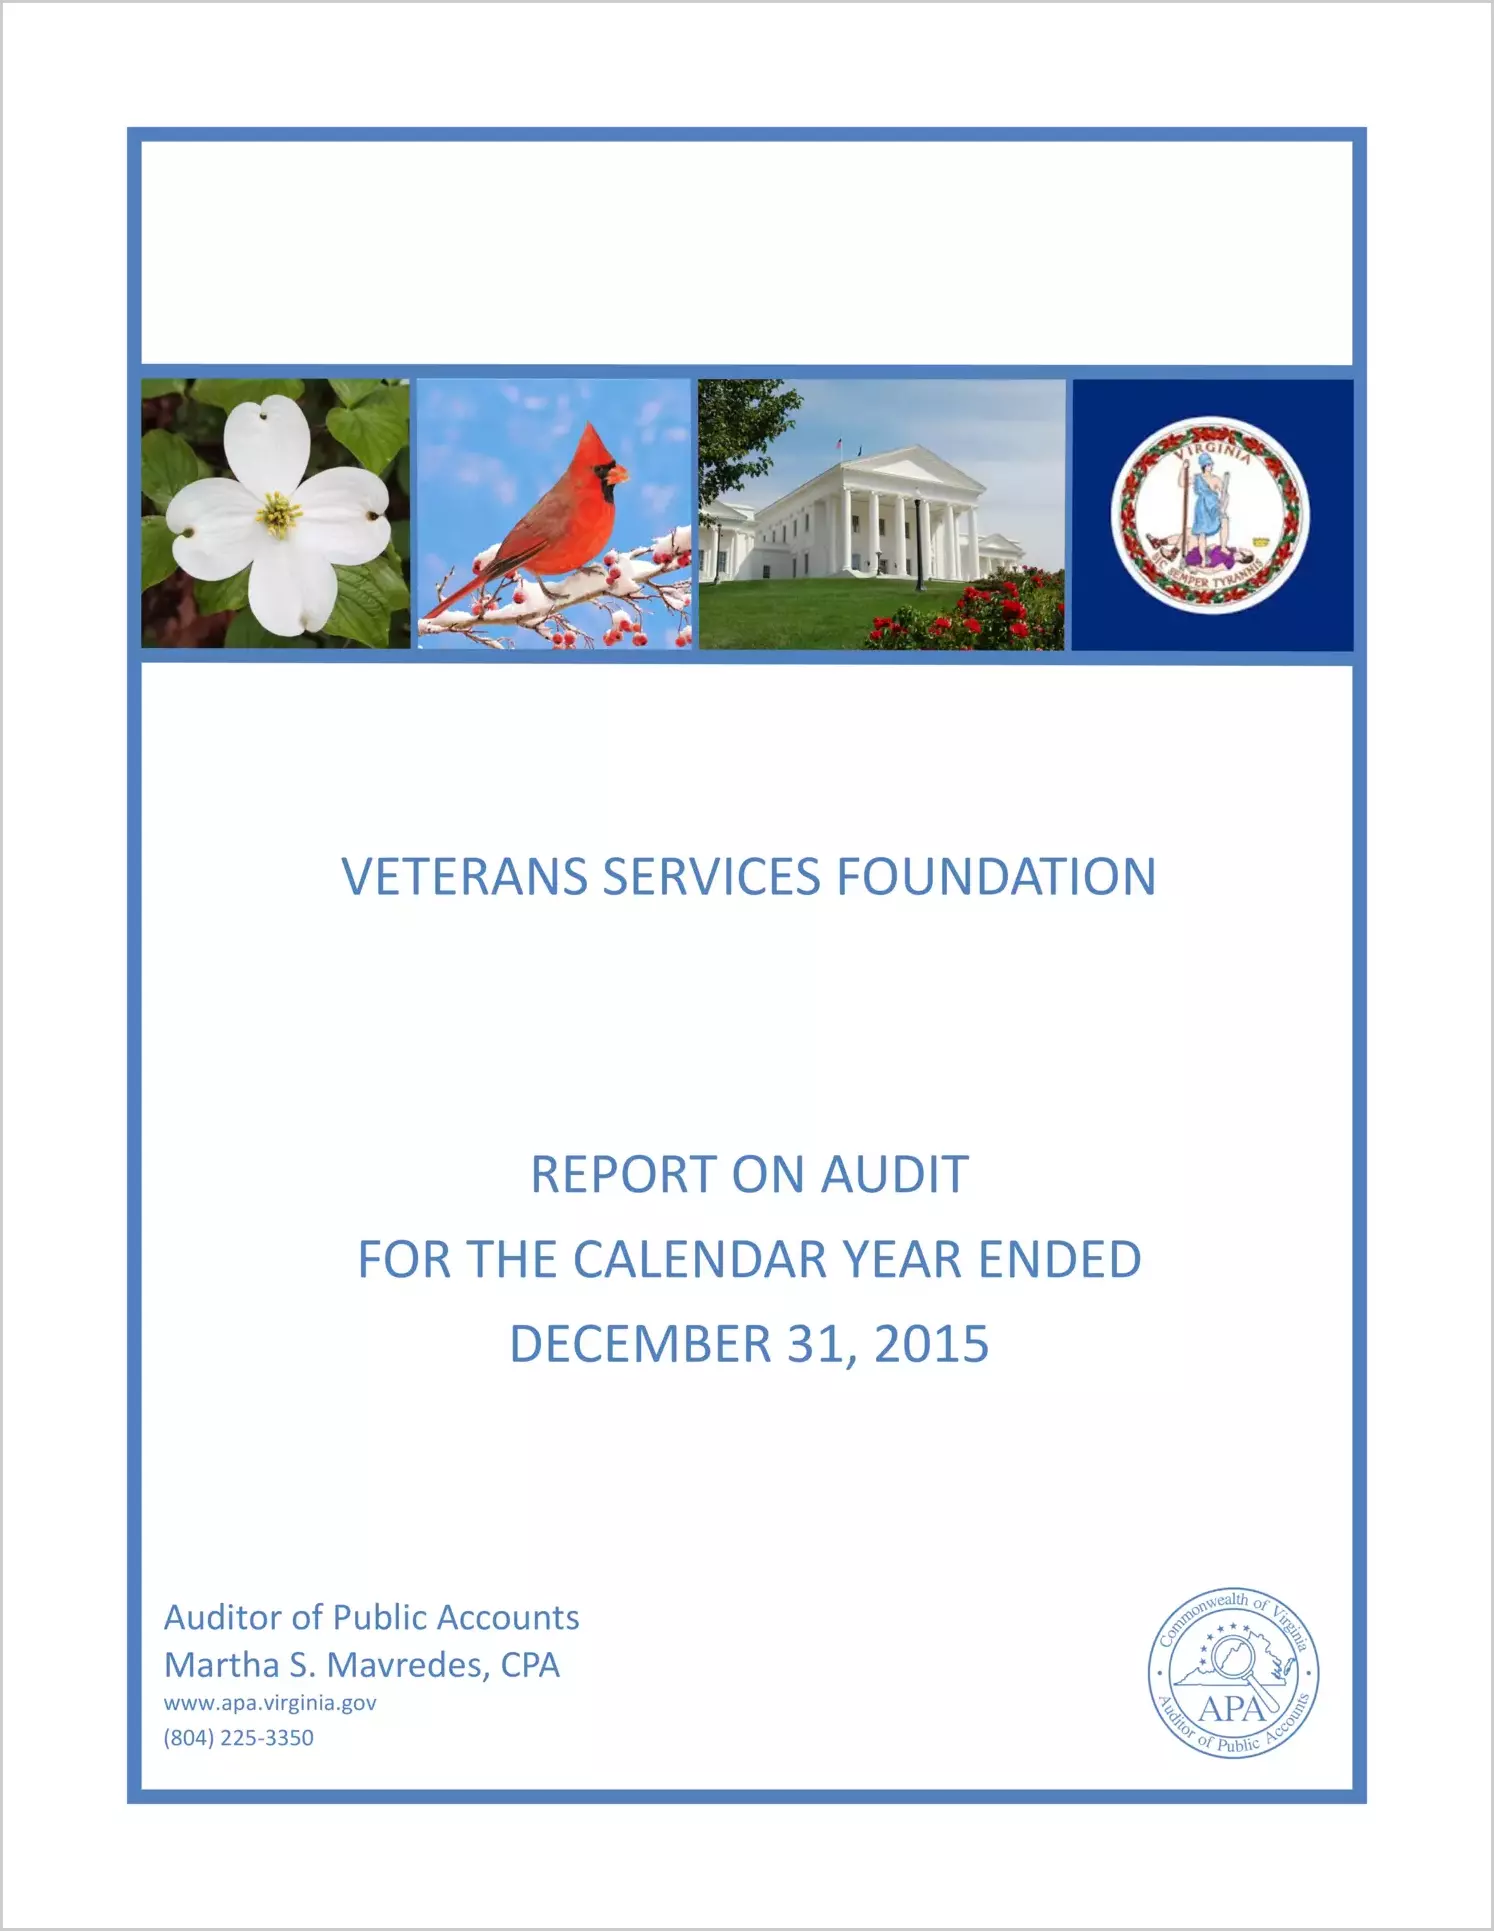 Veterans Services Foundation report on audit for the calendar year ended December 31, 2015